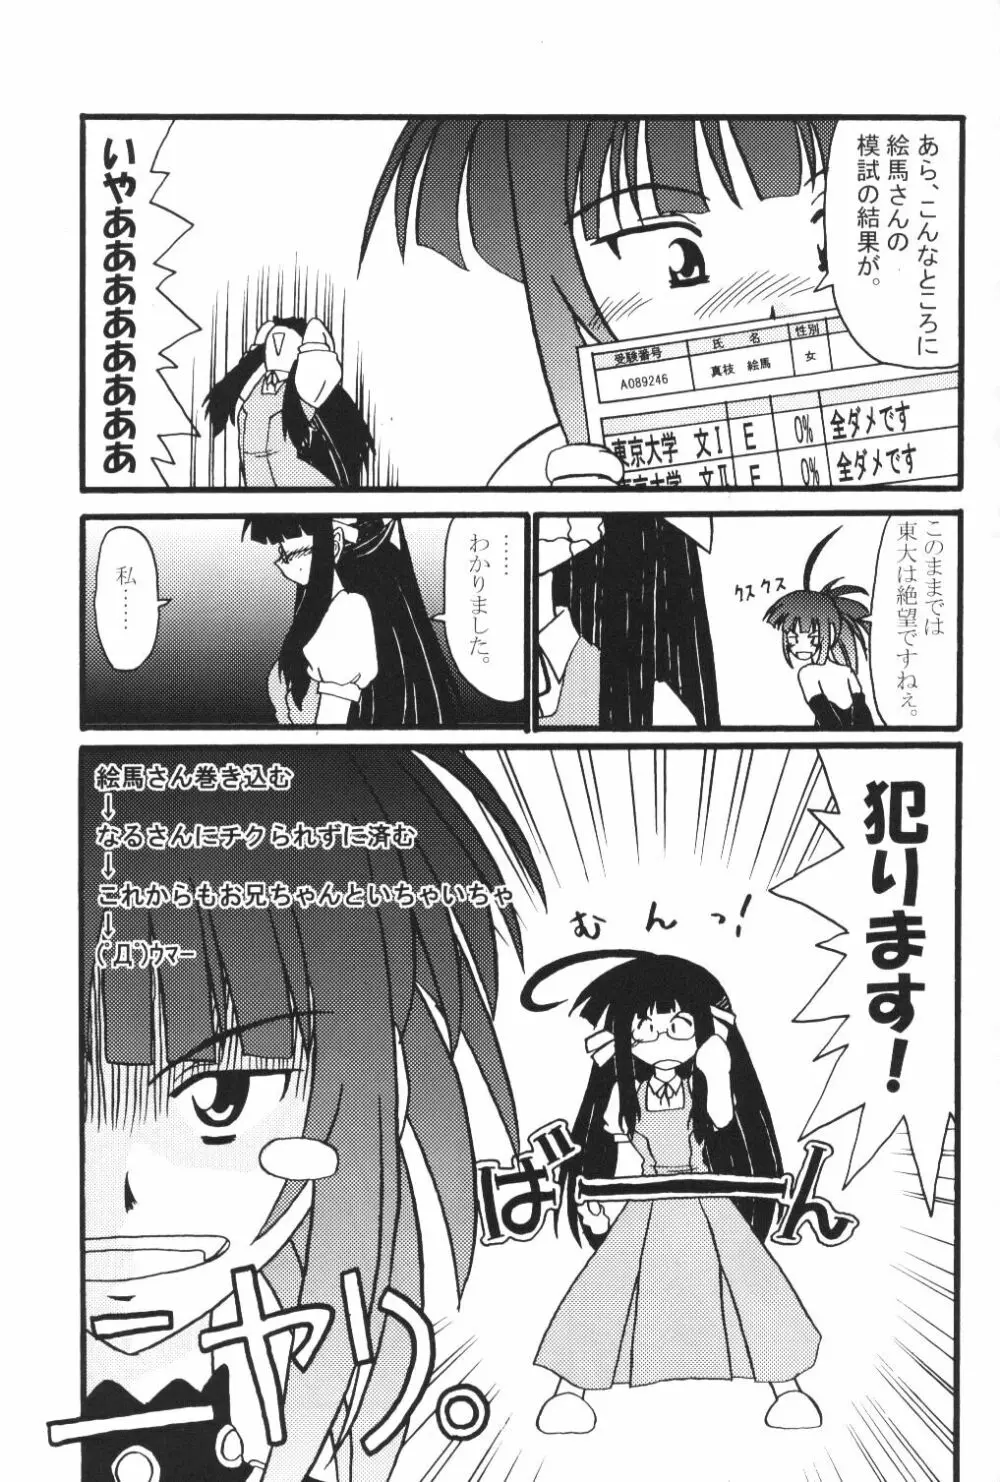 Sex Appeal 5 「セクあぴ」 Page.8